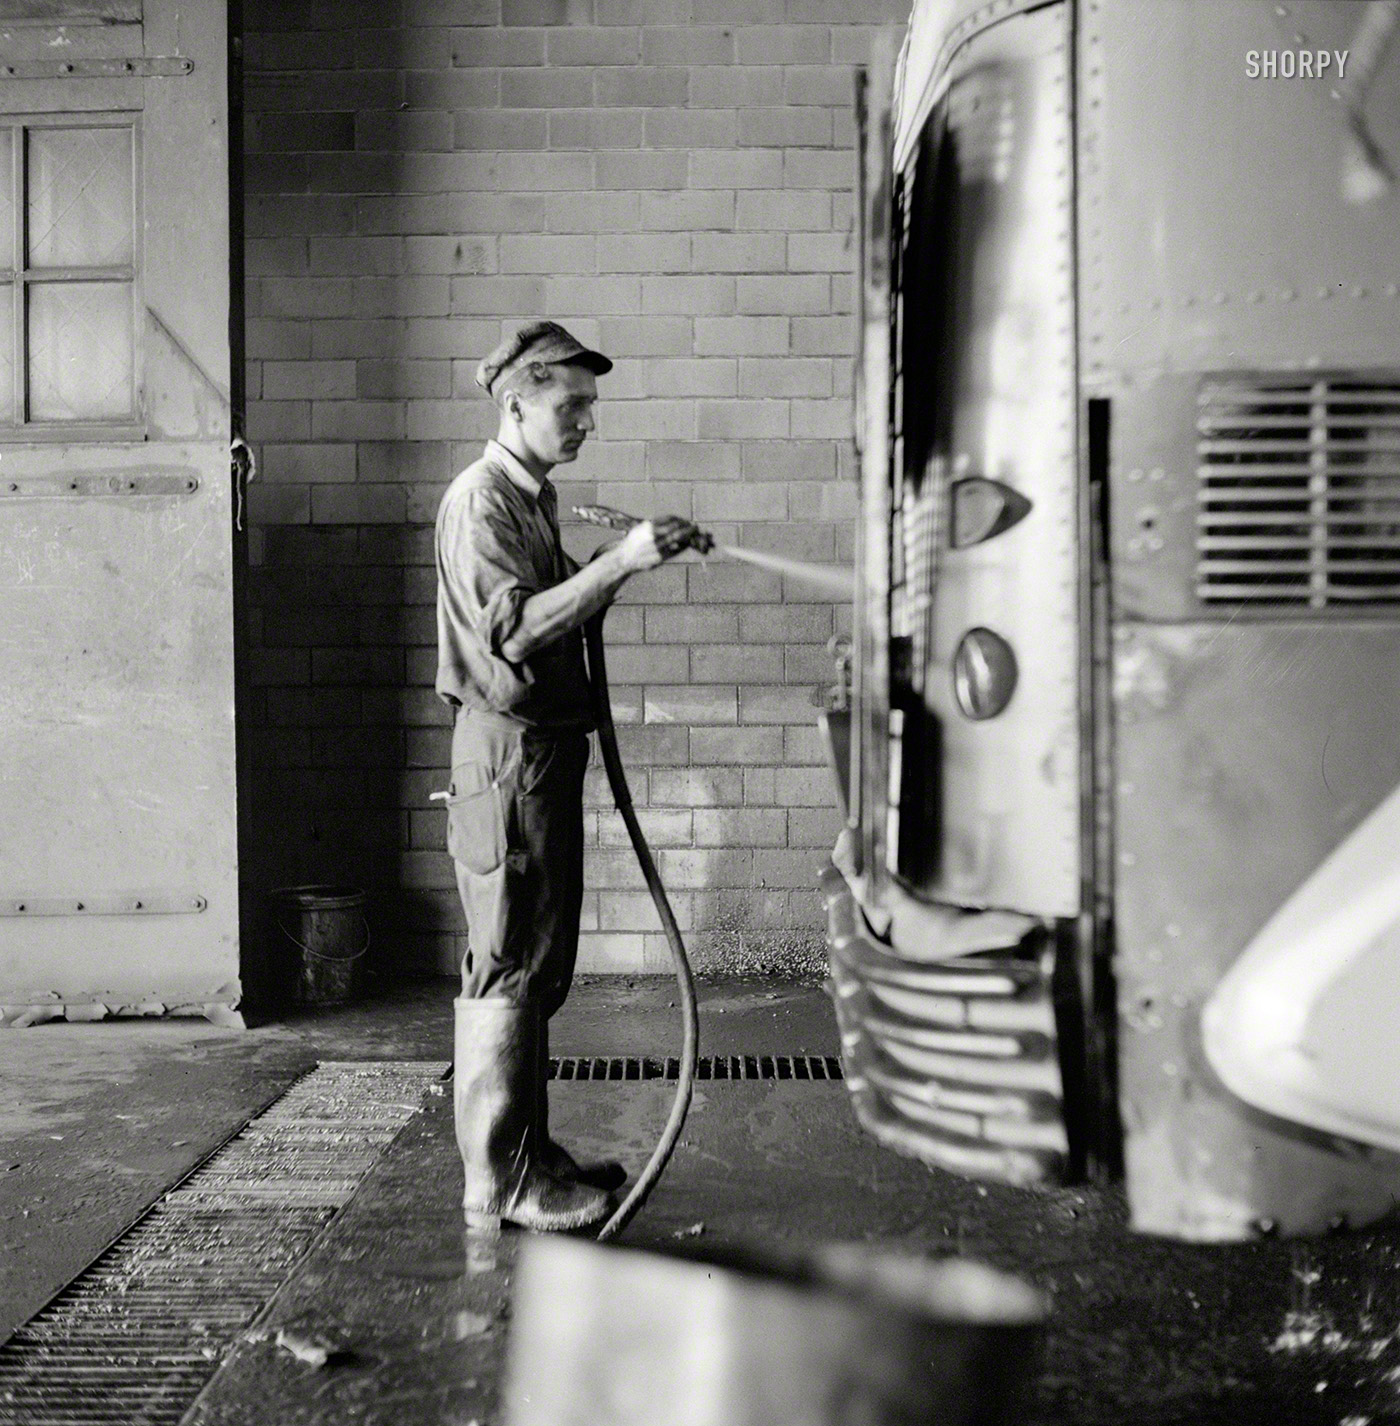 September 1943. "Pittsburgh, Pennsylvania. Bus serviceman washing a coach which has just come in from a run in the Greyhound garage." Photo by Esther Bubley for the Office of War Information. View full size.